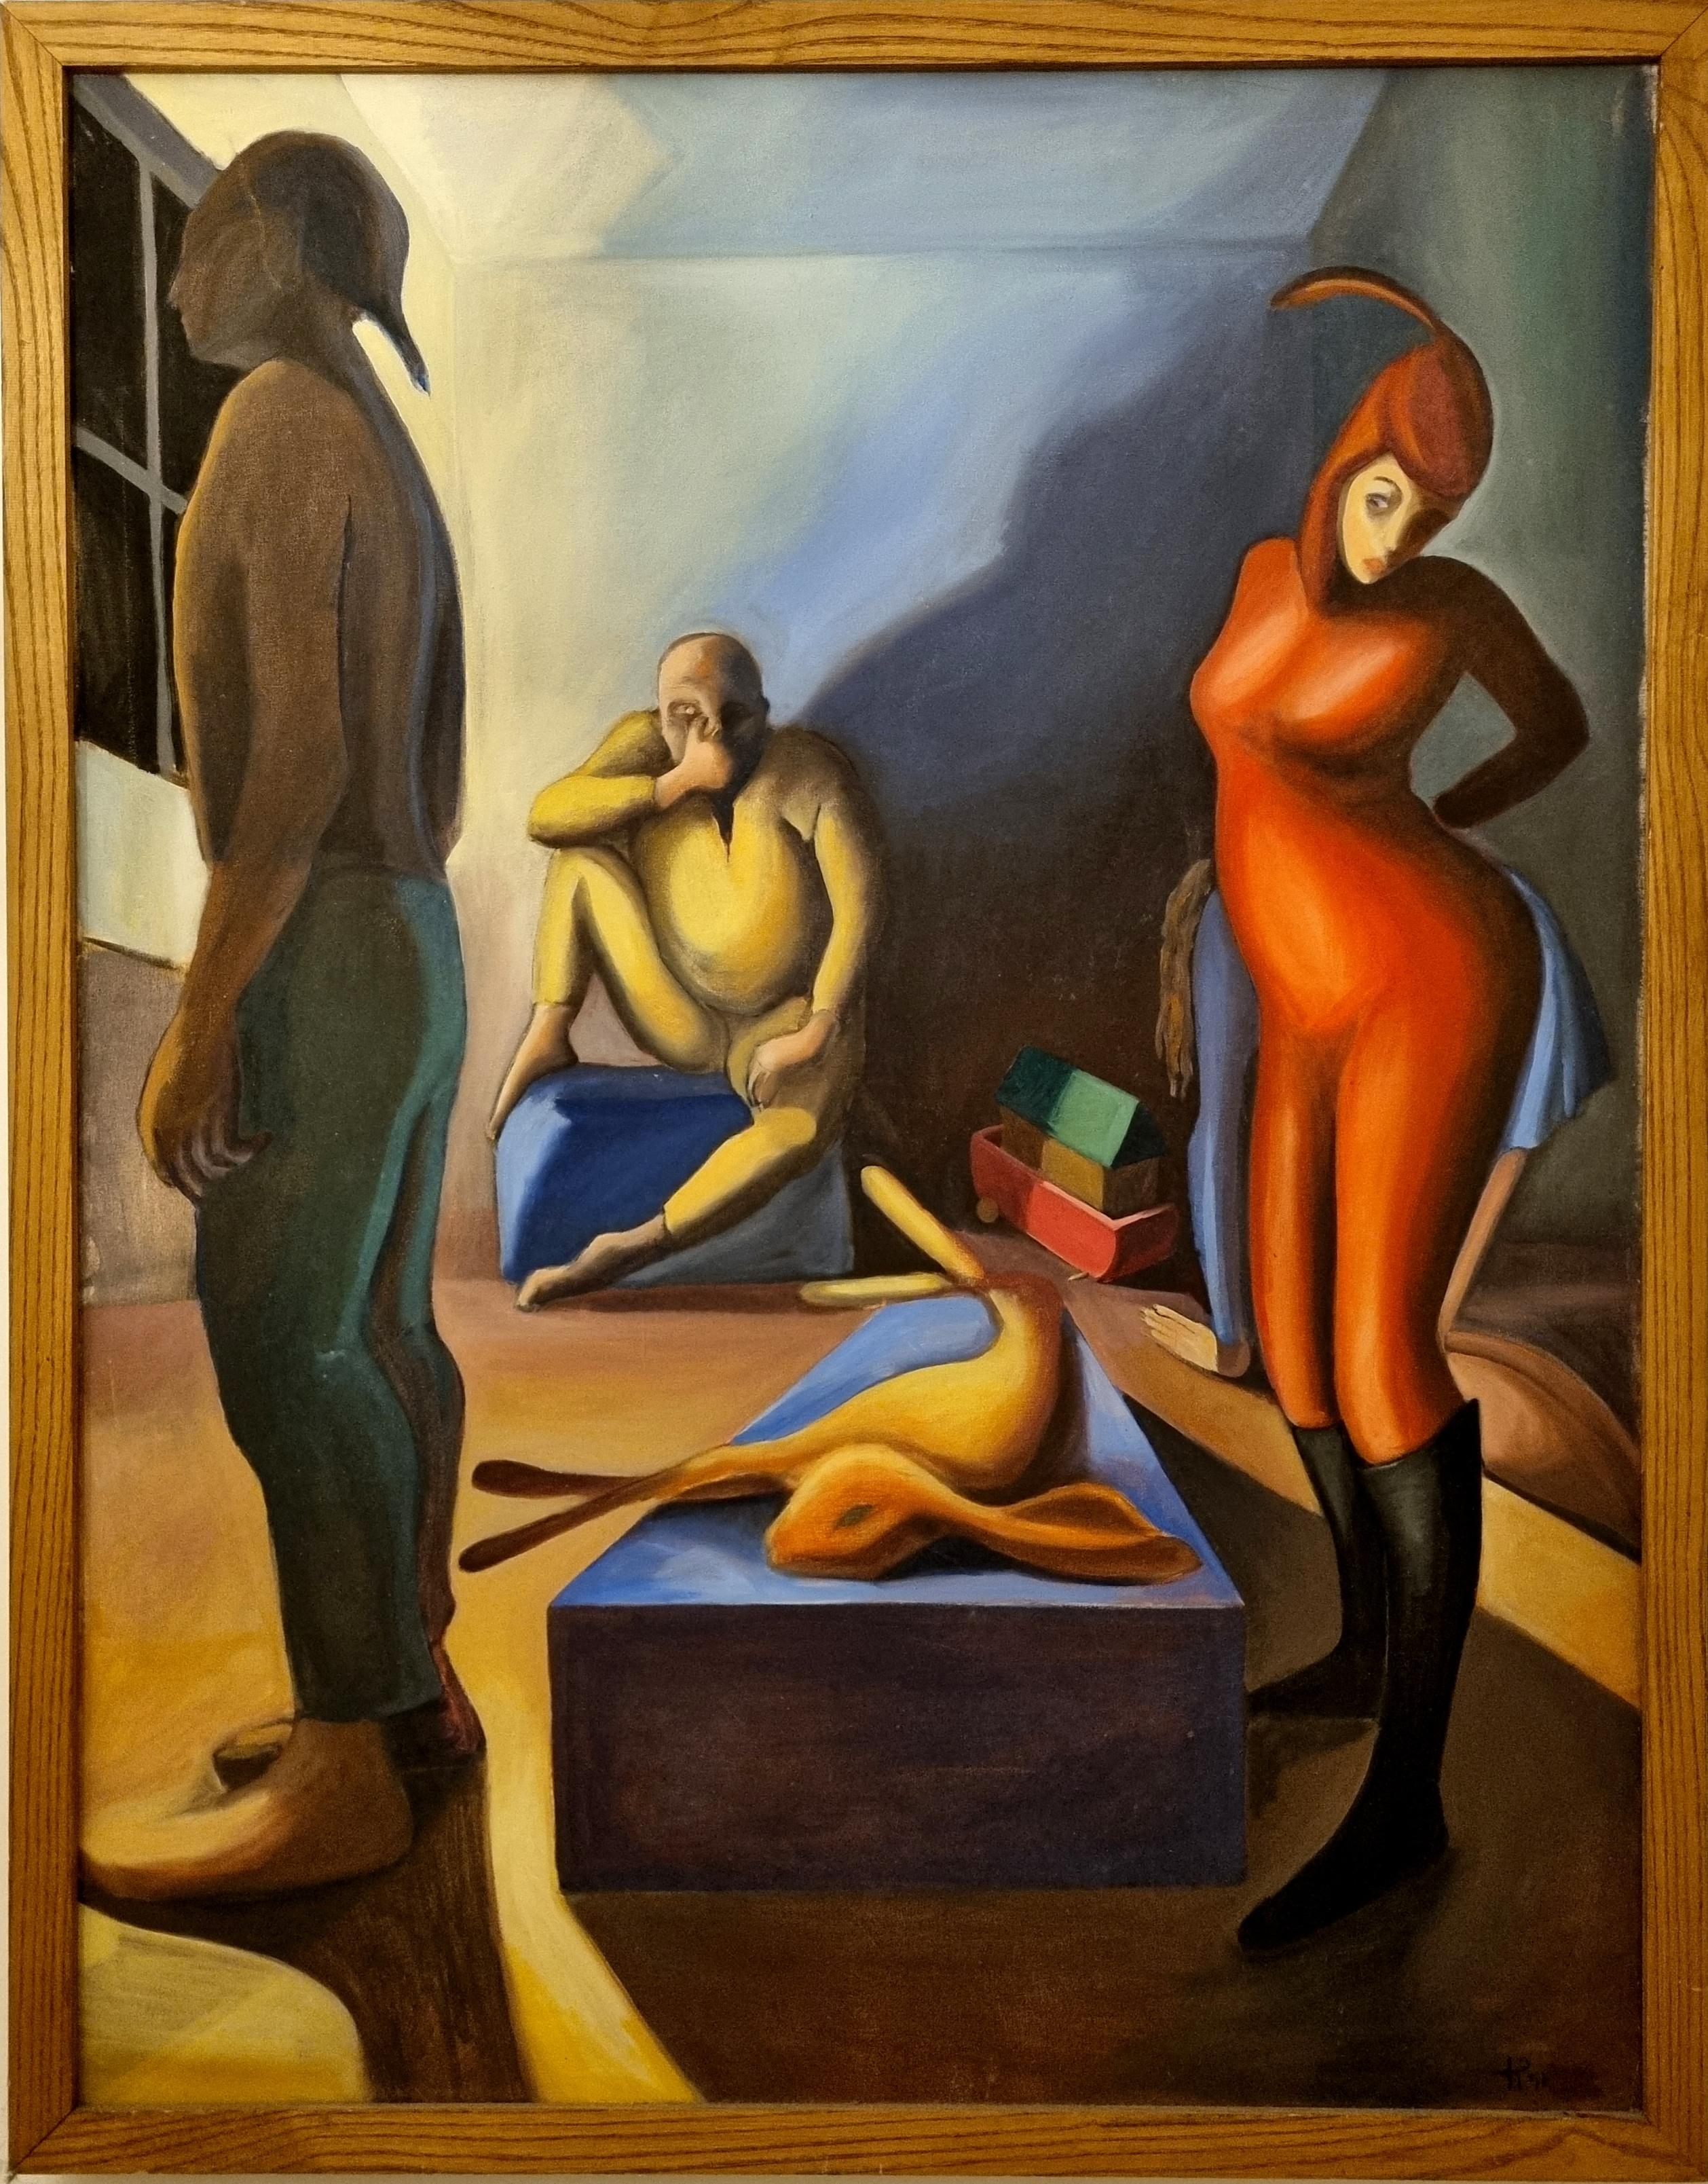 Unknown Figurative Painting - 20th Century Surrealist Oil Painting on Canvas